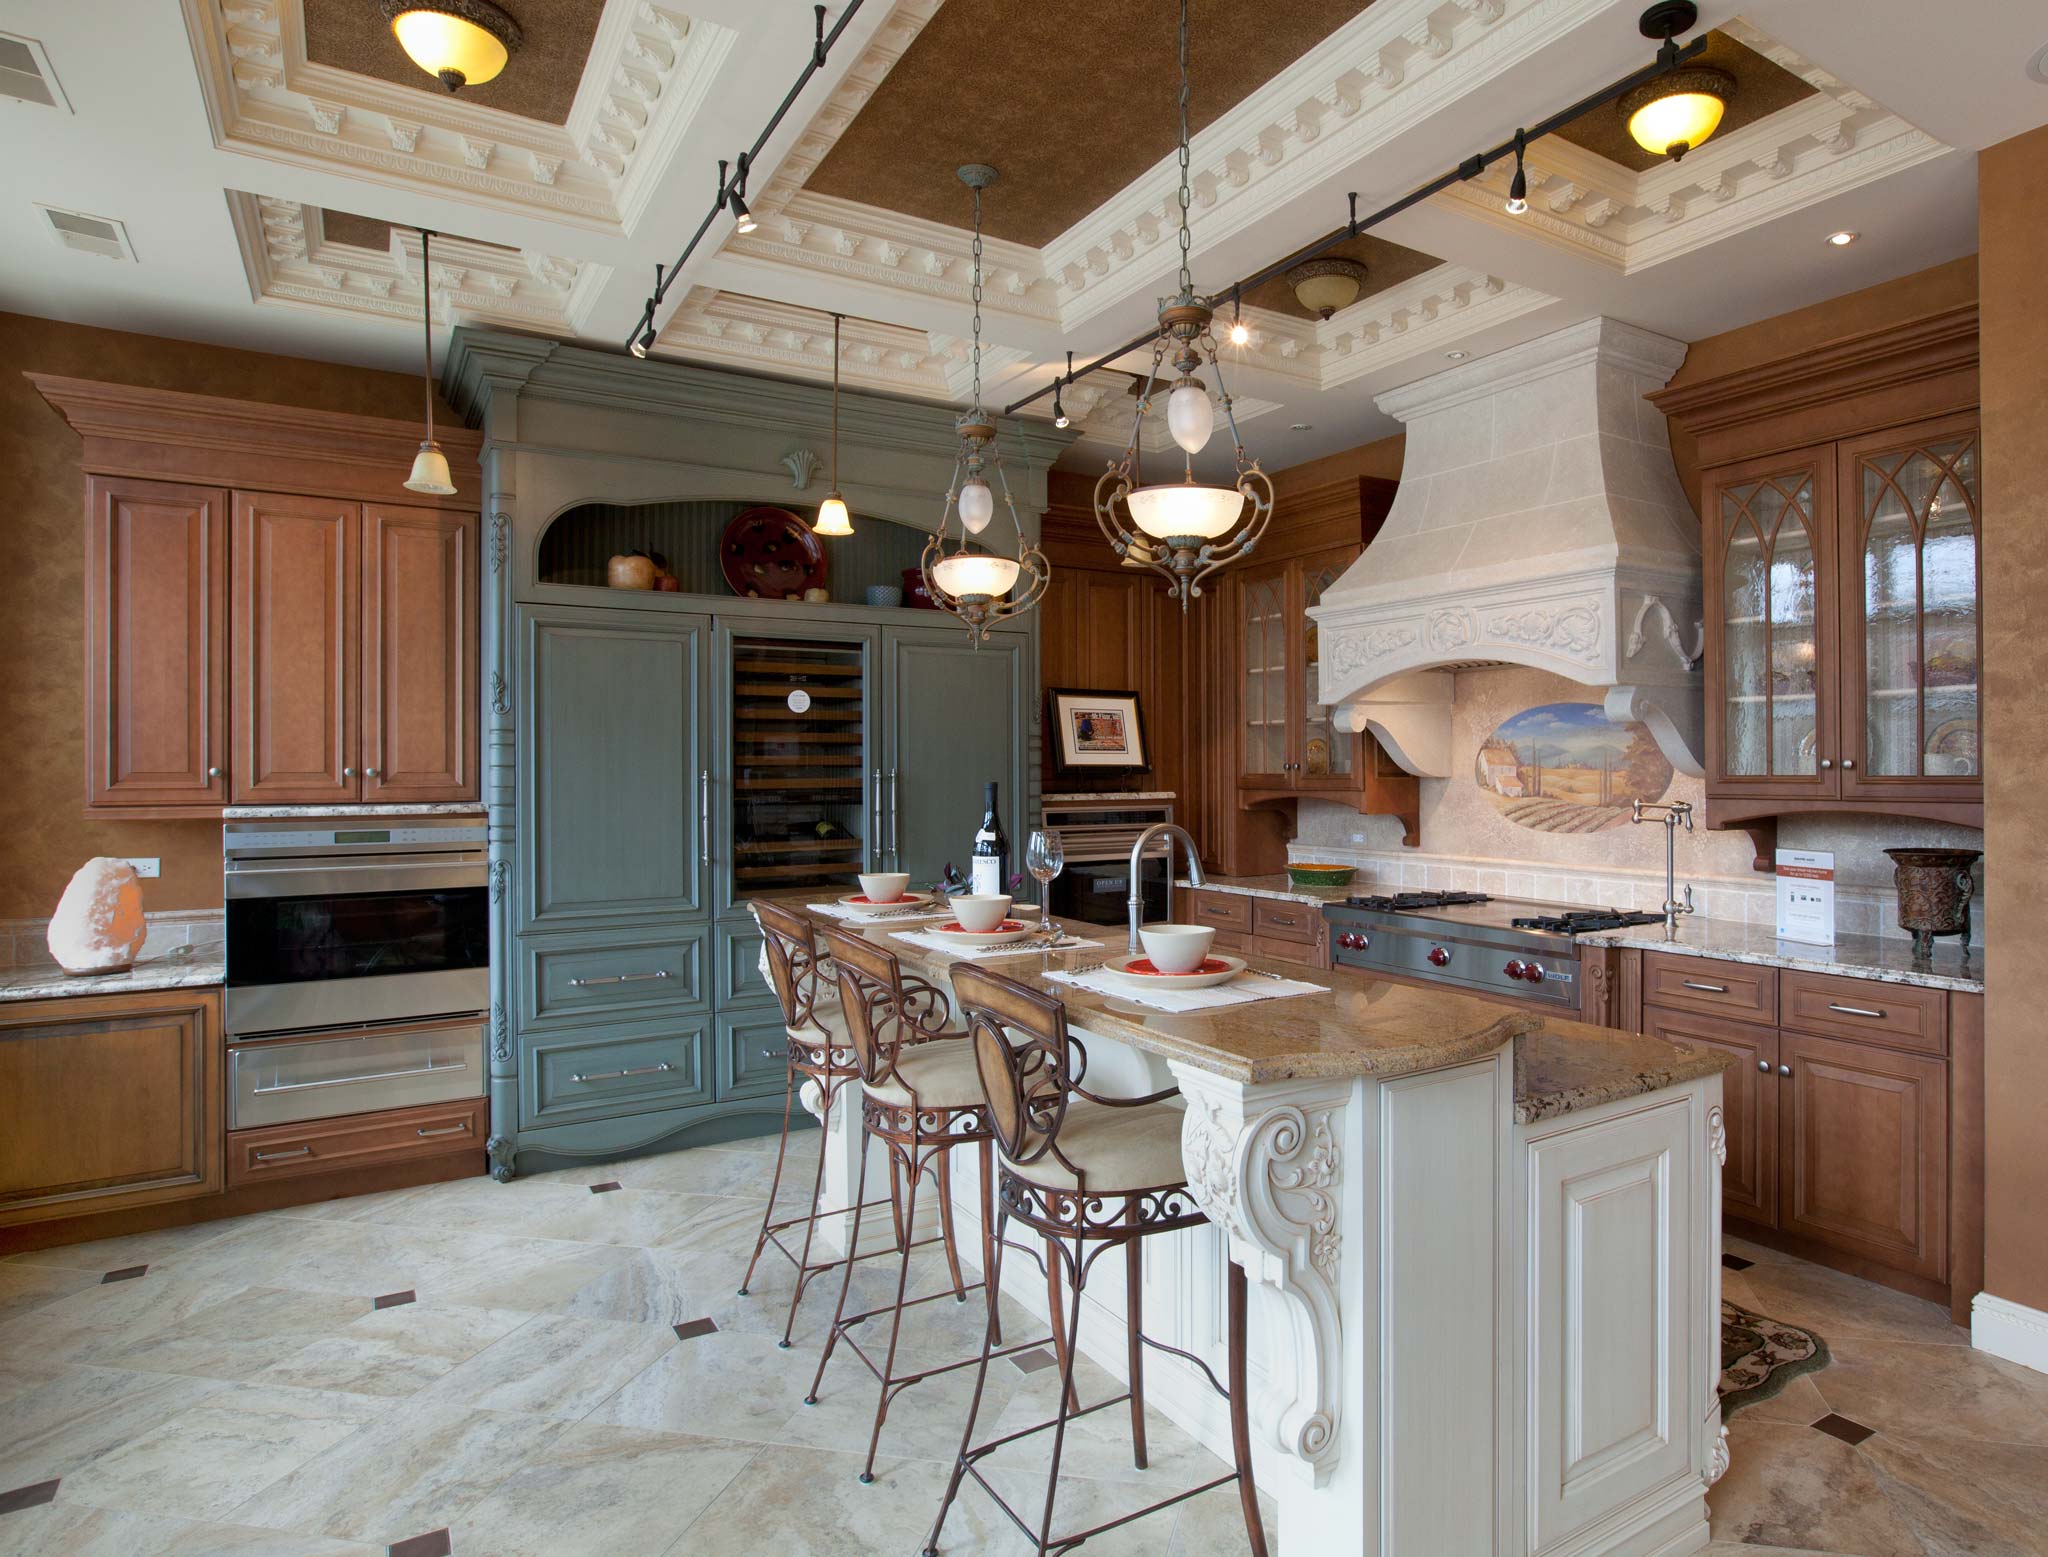 Kitchen Remodeling and Design | Mr. Floor Companies Chicago IL